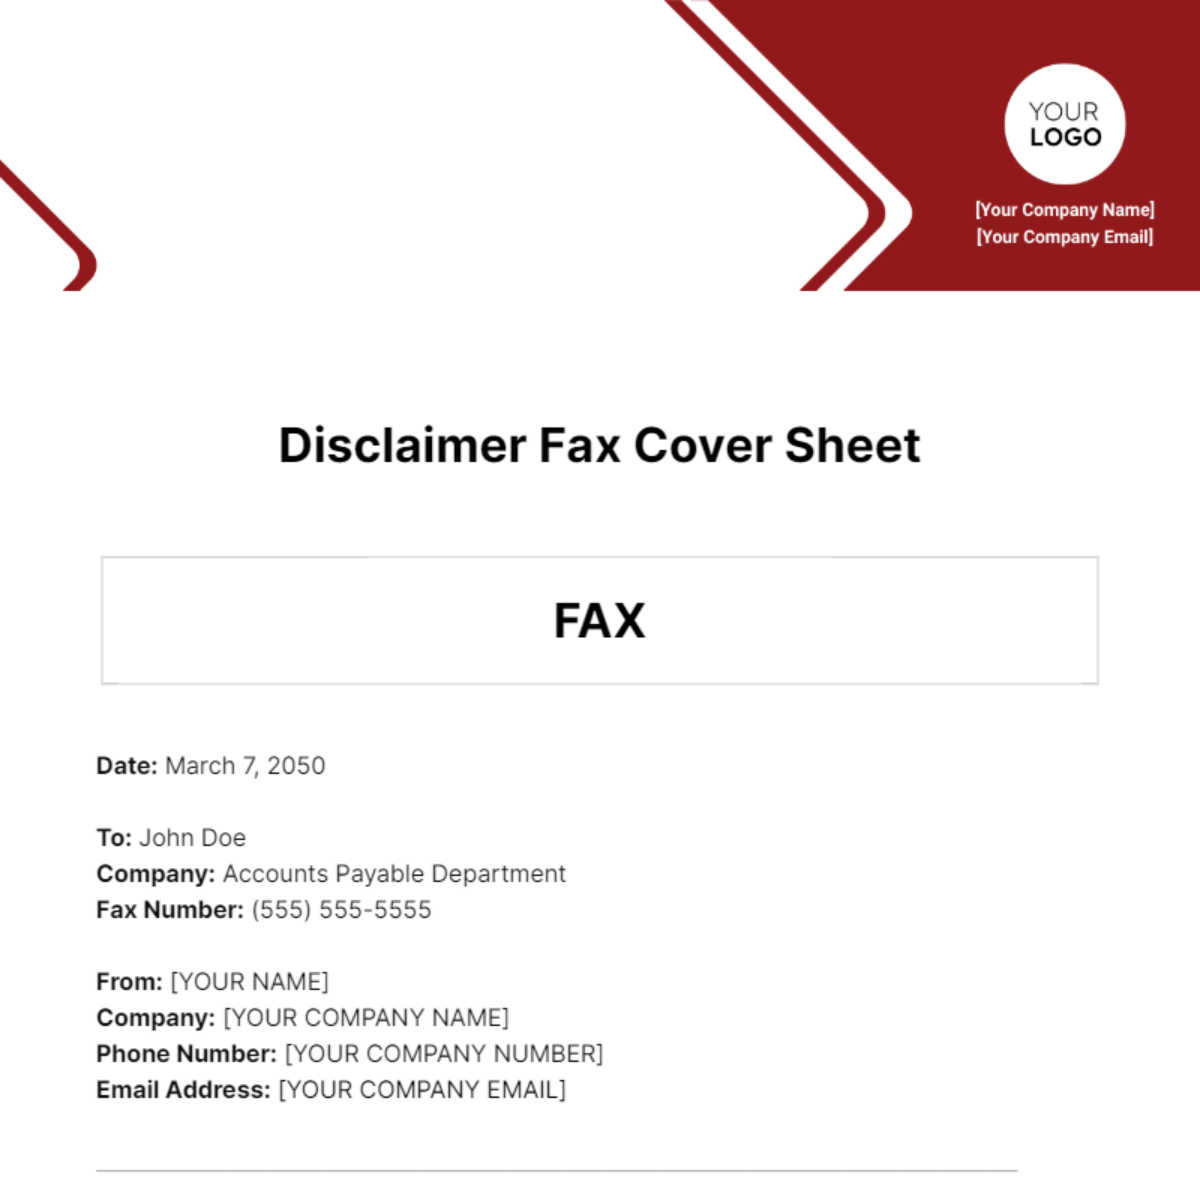 Disclaimer Fax Cover Sheet